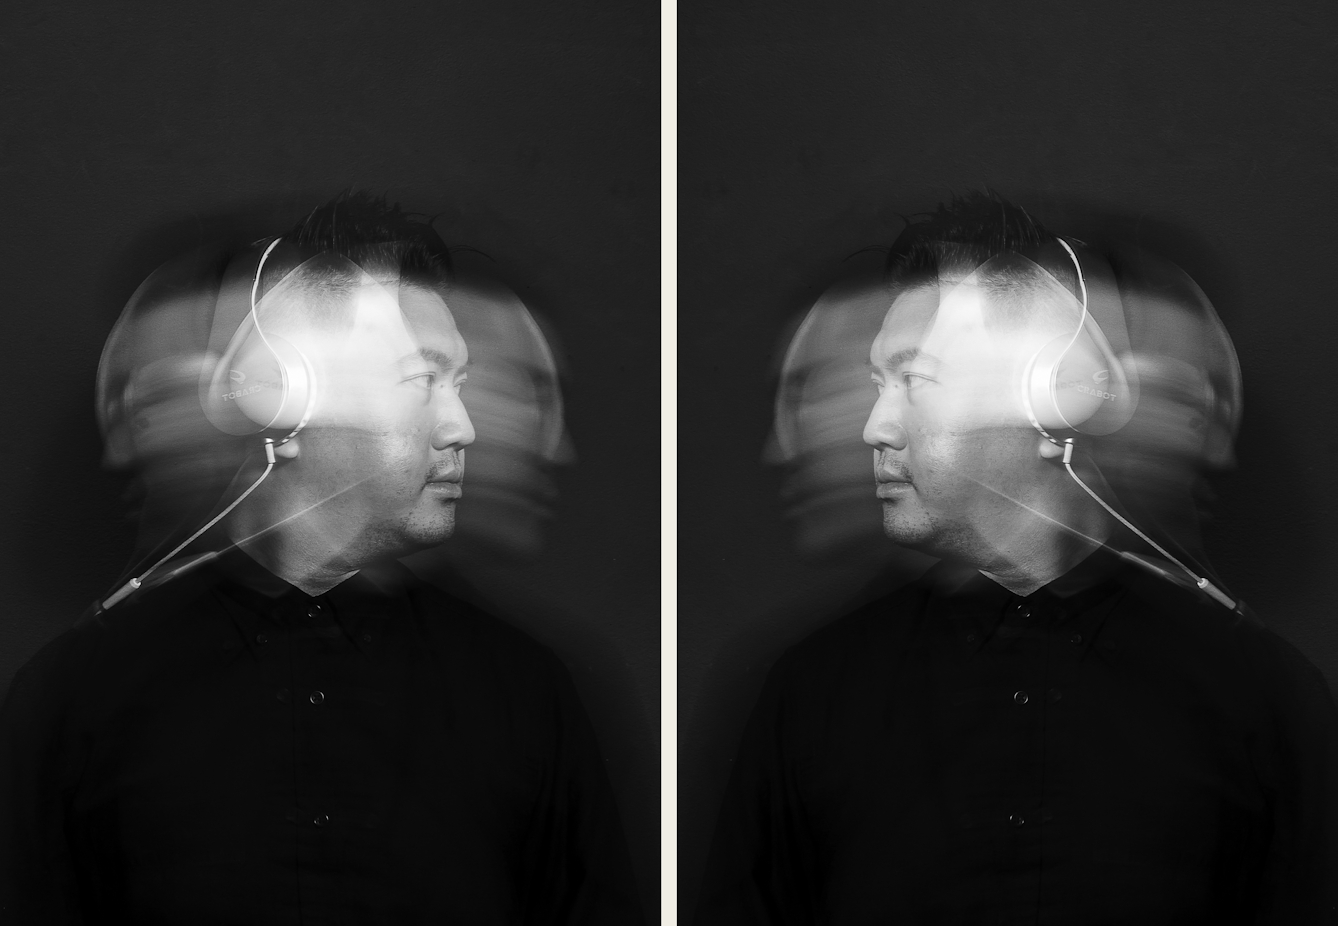 Photographic diptych showing on the left, a black and white photographic portrait of a man dressed in a black shirt wearing a pair of over ear headphone with the white cables trailing over his shoulder. He is pictured from the chest up. The man's face is spotlit in a small circle of light. He is standing against a black background which means he is surrounded by darkness. He is moving his head from side to side causing his head to motion blur in an arc across the image. A flash light has caught this head as it is turned to the right, creating a sharp image within the blur. The image on the right is a mirror image of the image not he left so the two frozen faces are looking at each other.